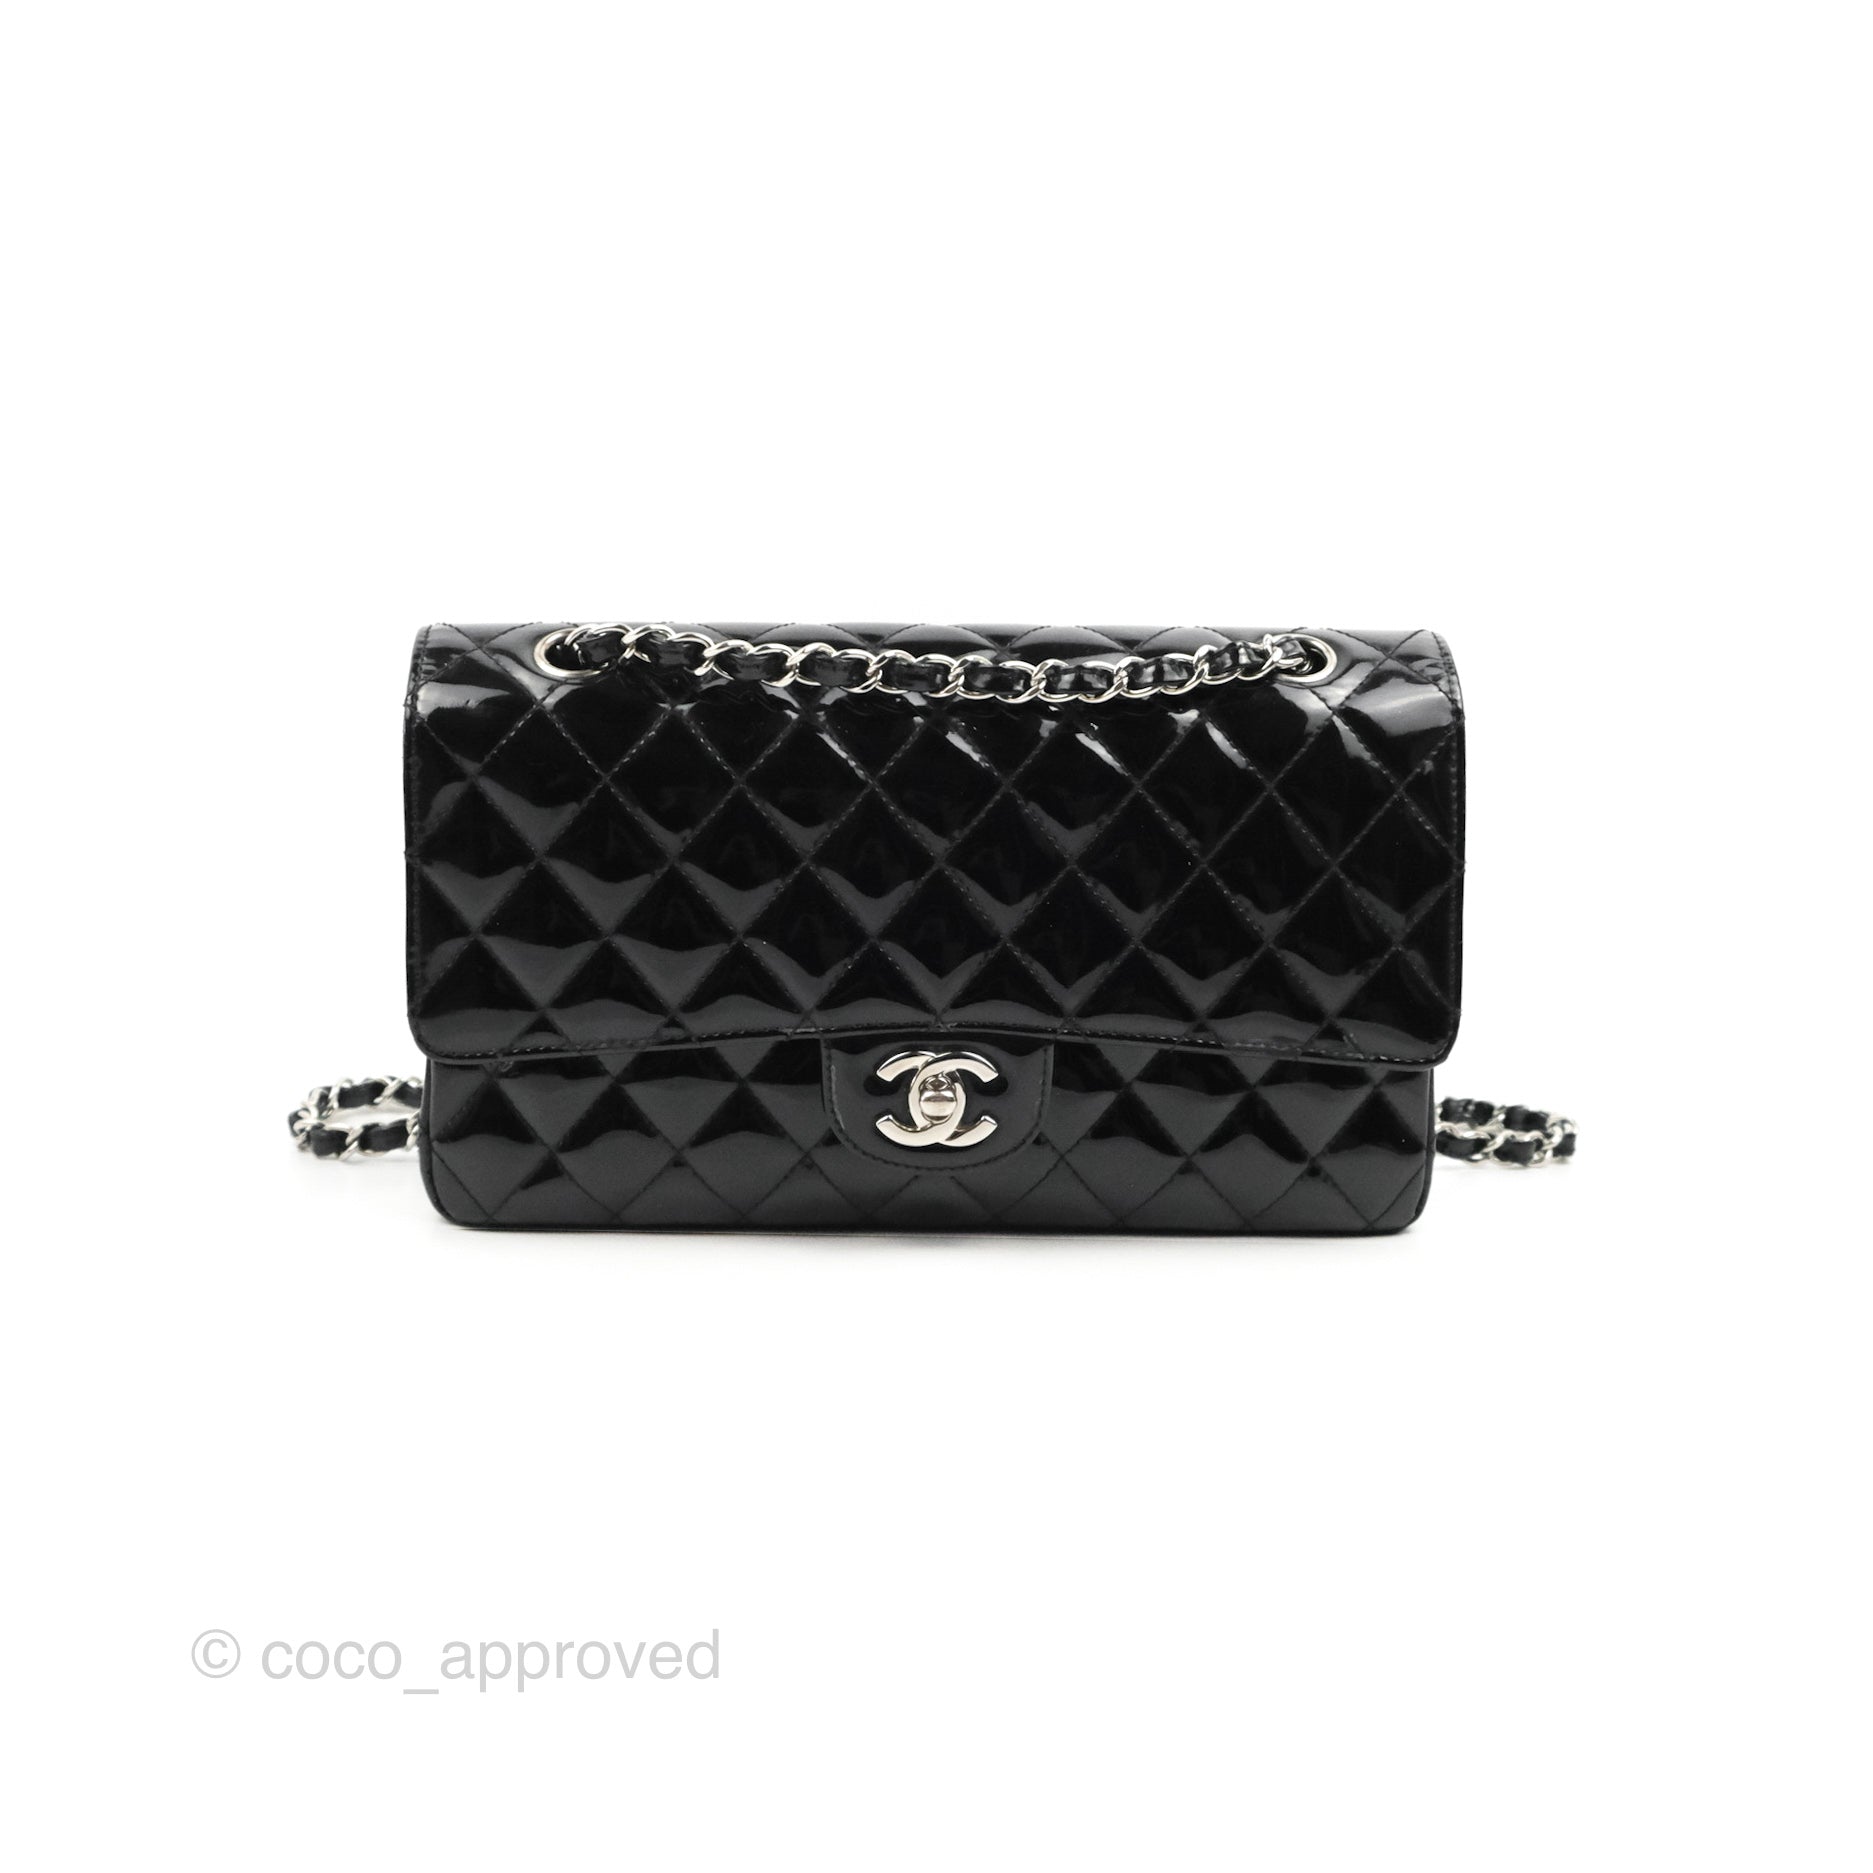 Chanel Medium Classic Double Flap Bag Black Patent Leather Silver Hardware